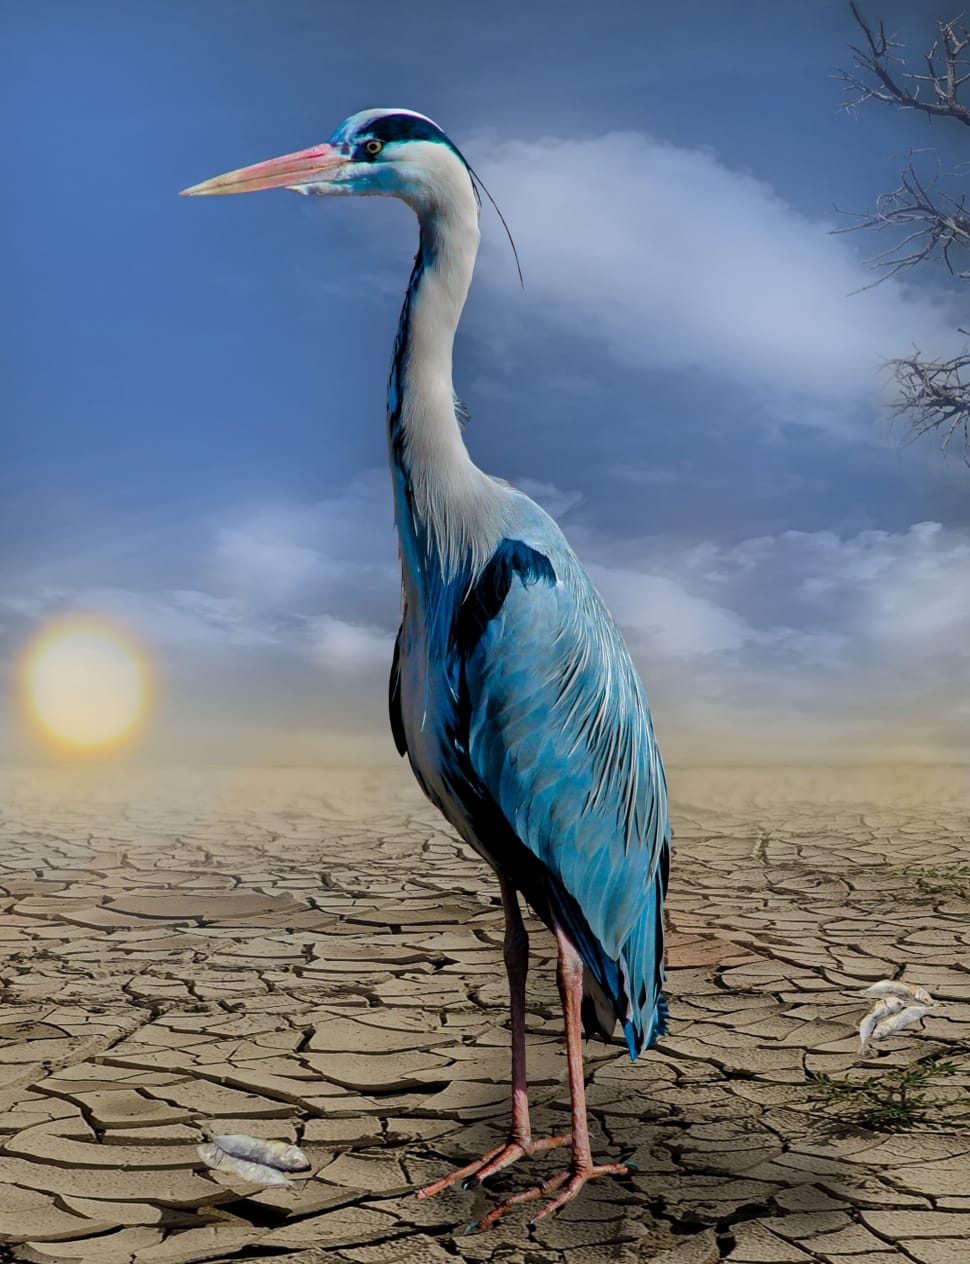 White And Blue Long Neck Bird Standing In Soil During Dry Season Free Image Peakpx